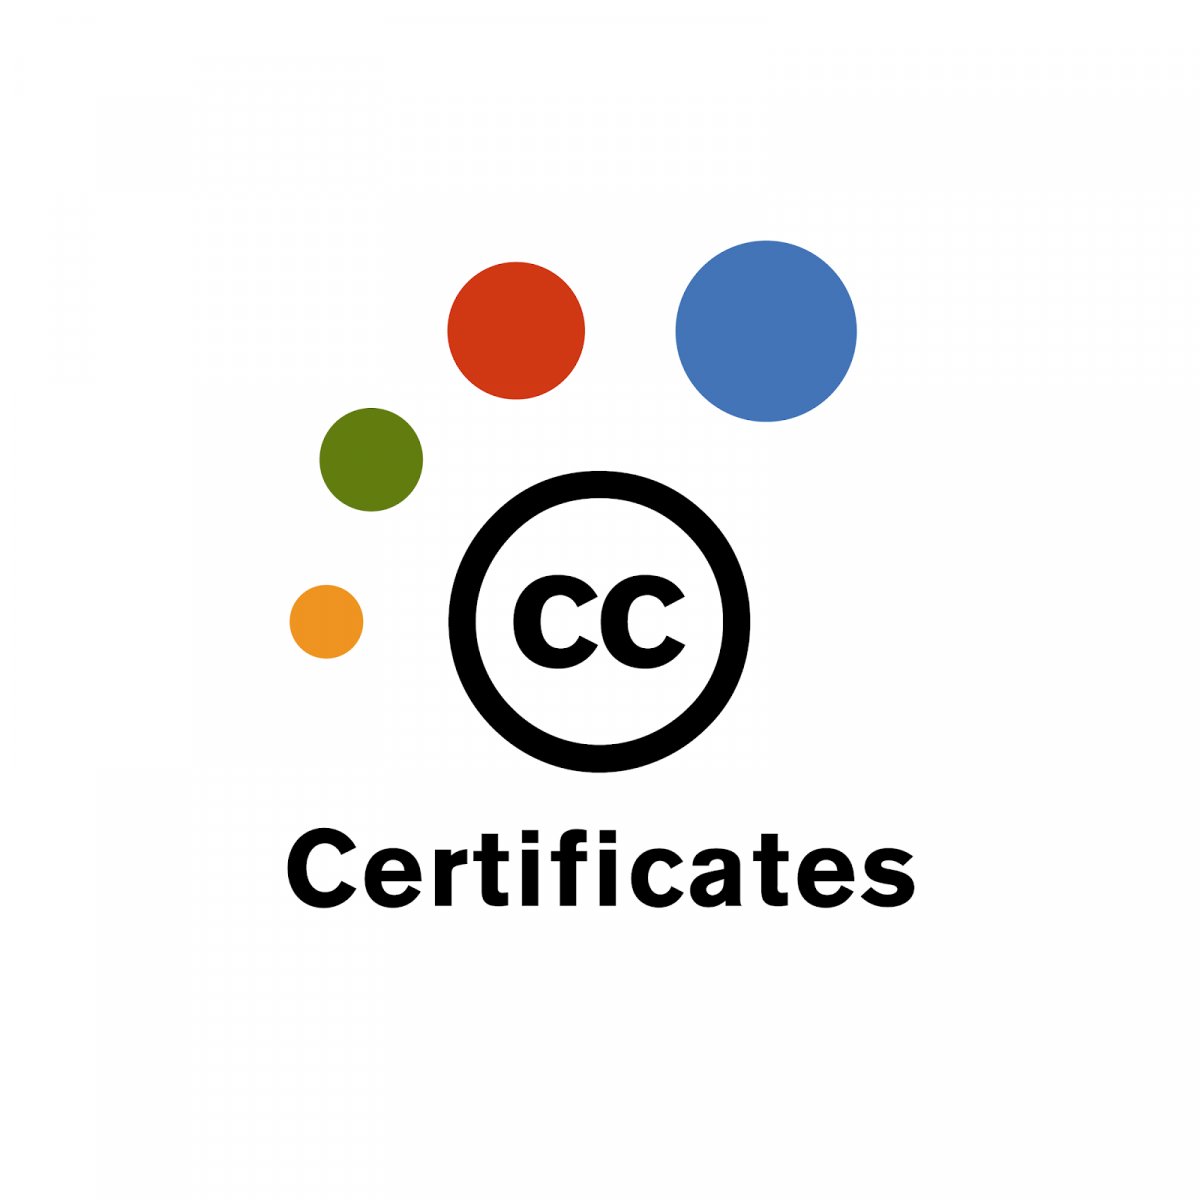 Want to understand copyright, public domain and open licensing? Join our 10-week #CCCert training, starting 6/10. See what grads from 66 countries say: loom.ly/qutreMM 🌍 Register today loom.ly/bL3ueTk !! ✅ #OER #openaccess #professionaldevelopment